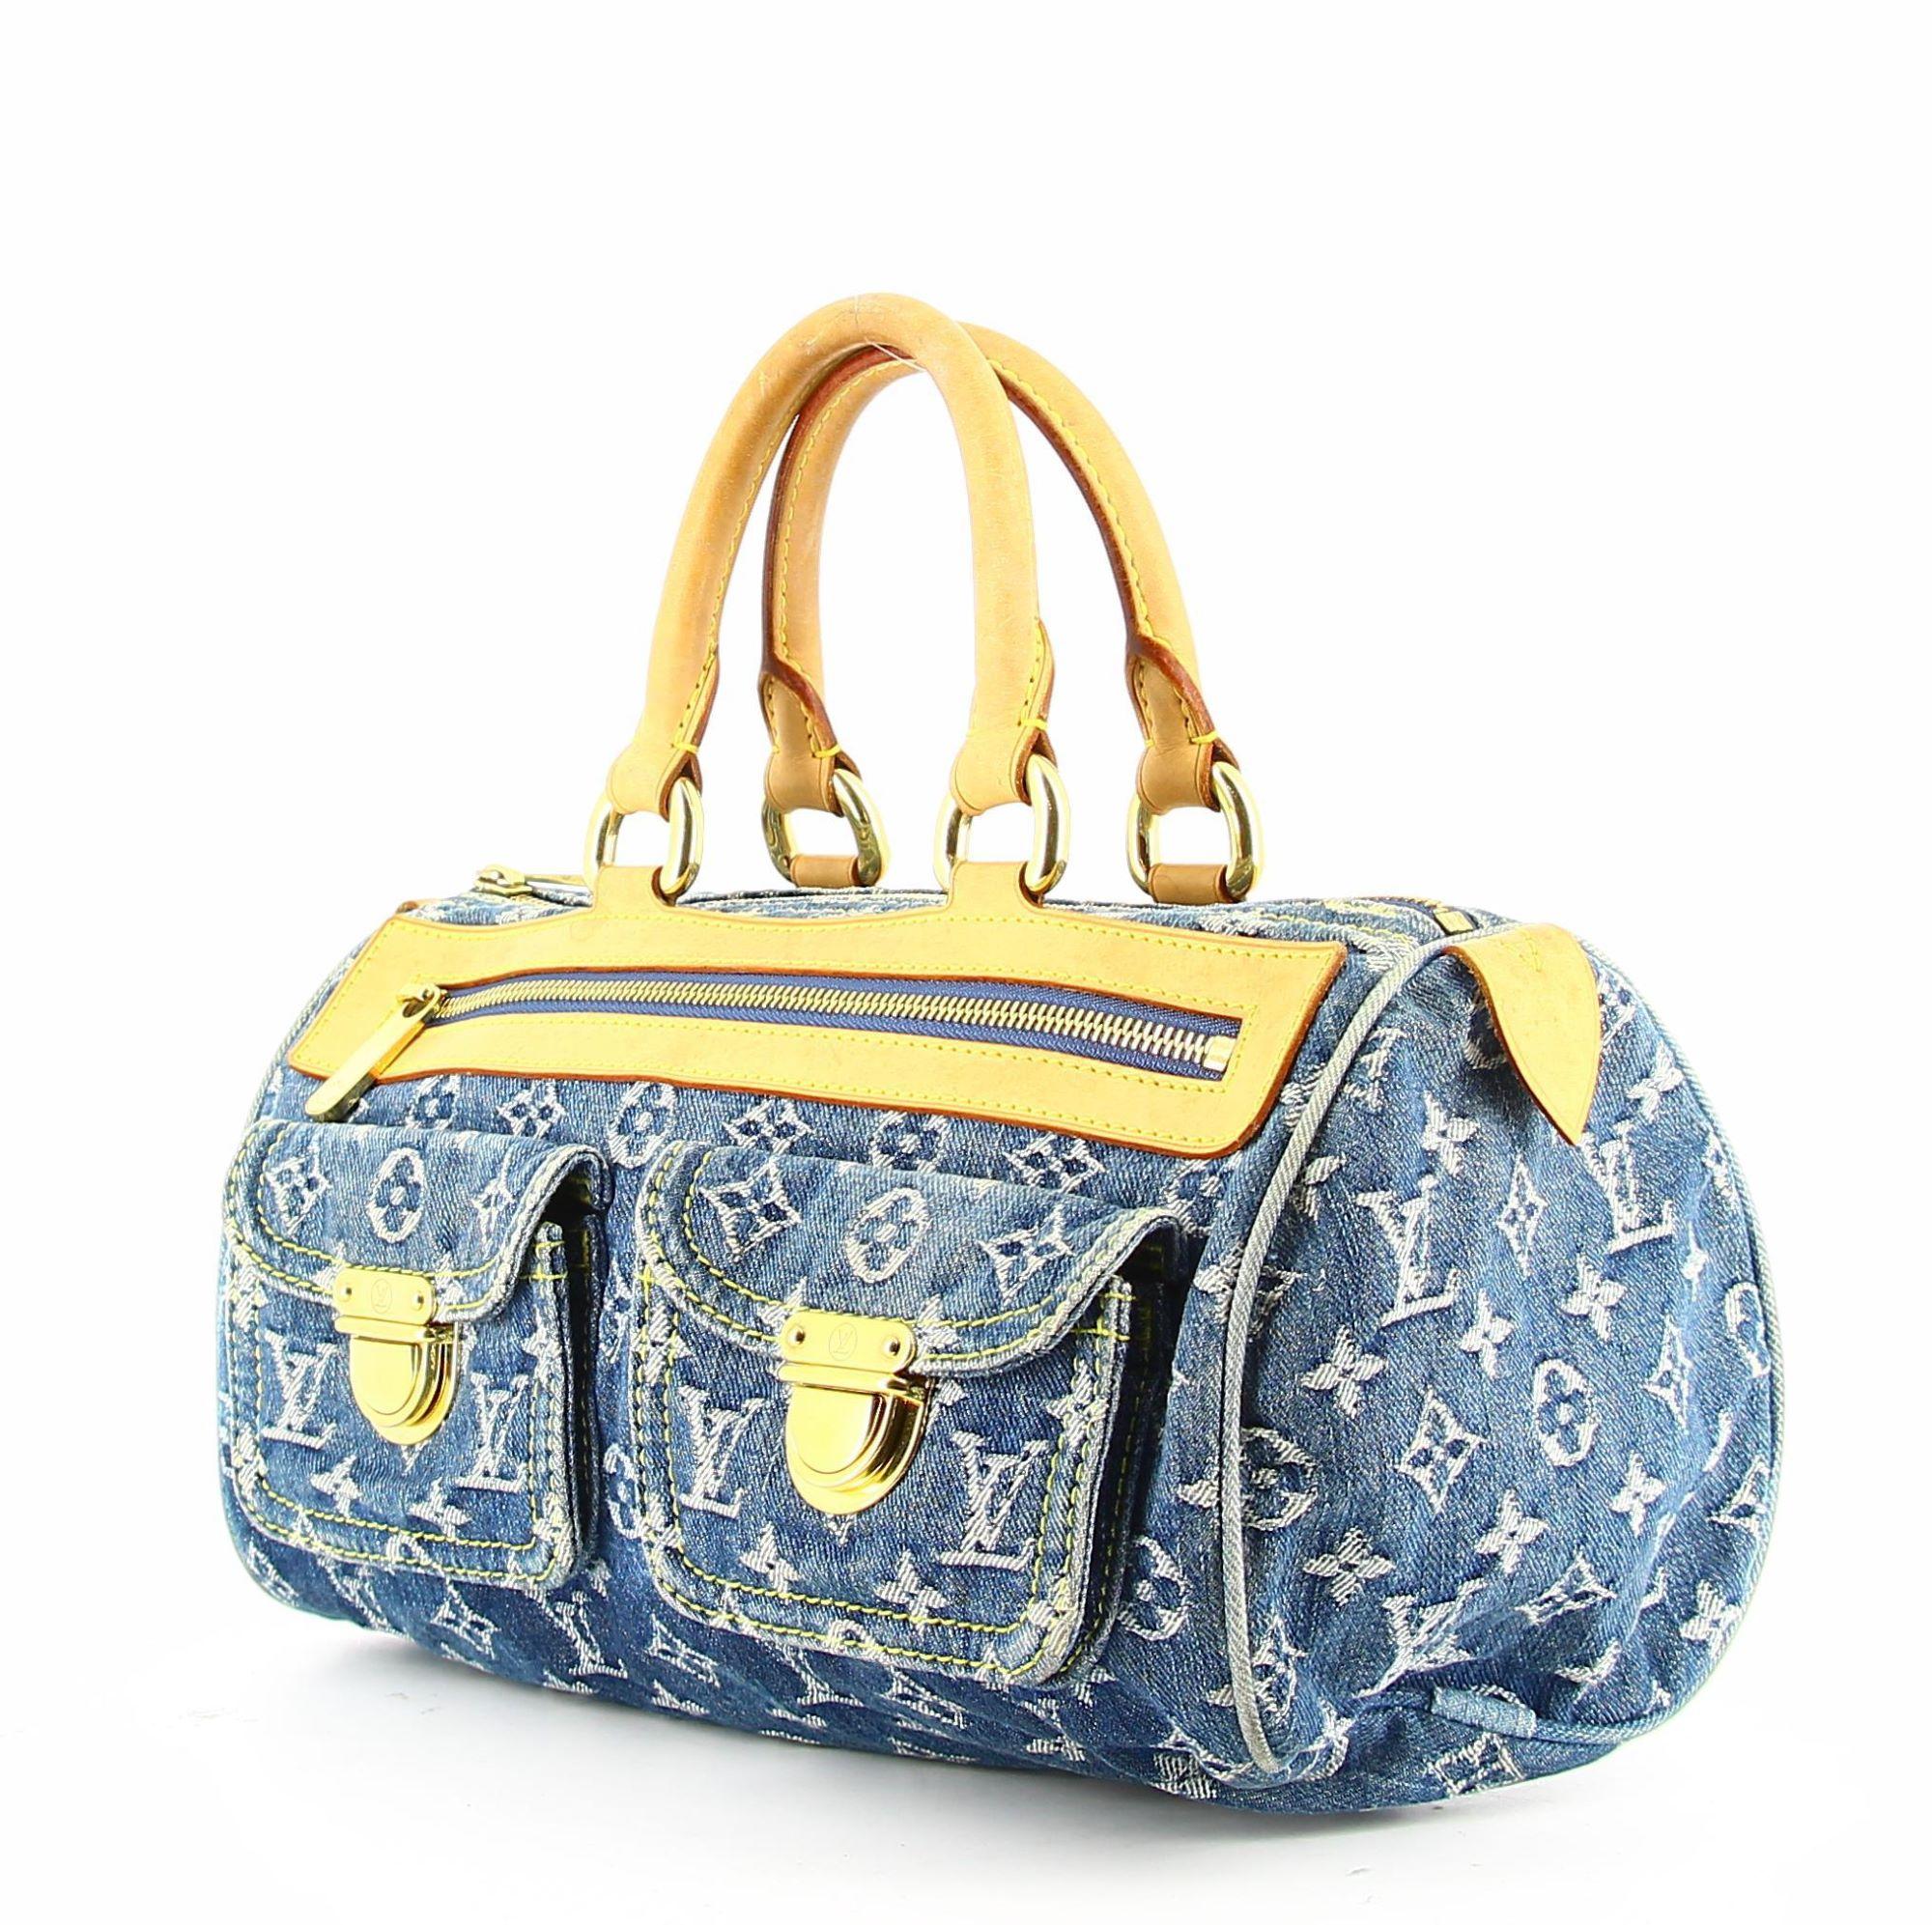 Louis Vuitton 2005 Neo Speedy bag in monogram denim.
Good condition, shows signs of wear over time, as on the straps.
Monogrammed denim bag, which can be worn in everyday life, and which easily matches your style of the day.
Small pockets inside,